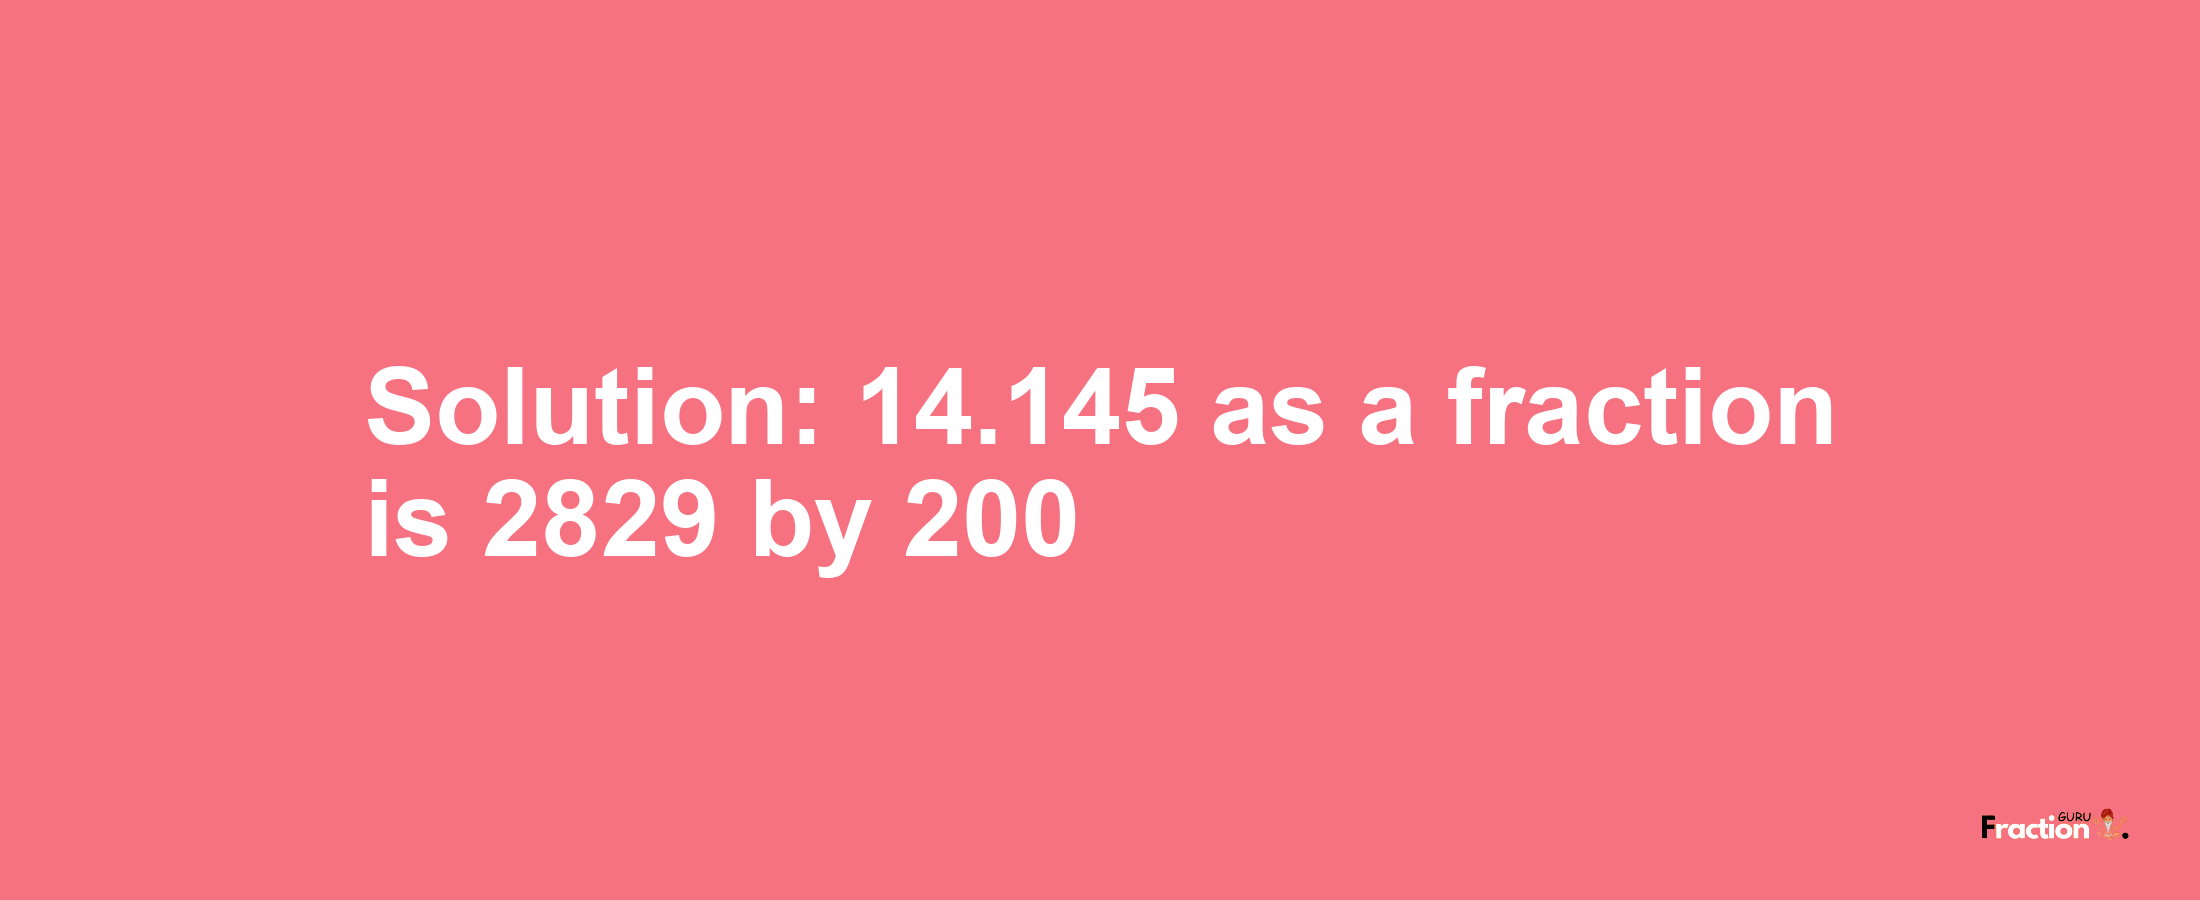 Solution:14.145 as a fraction is 2829/200